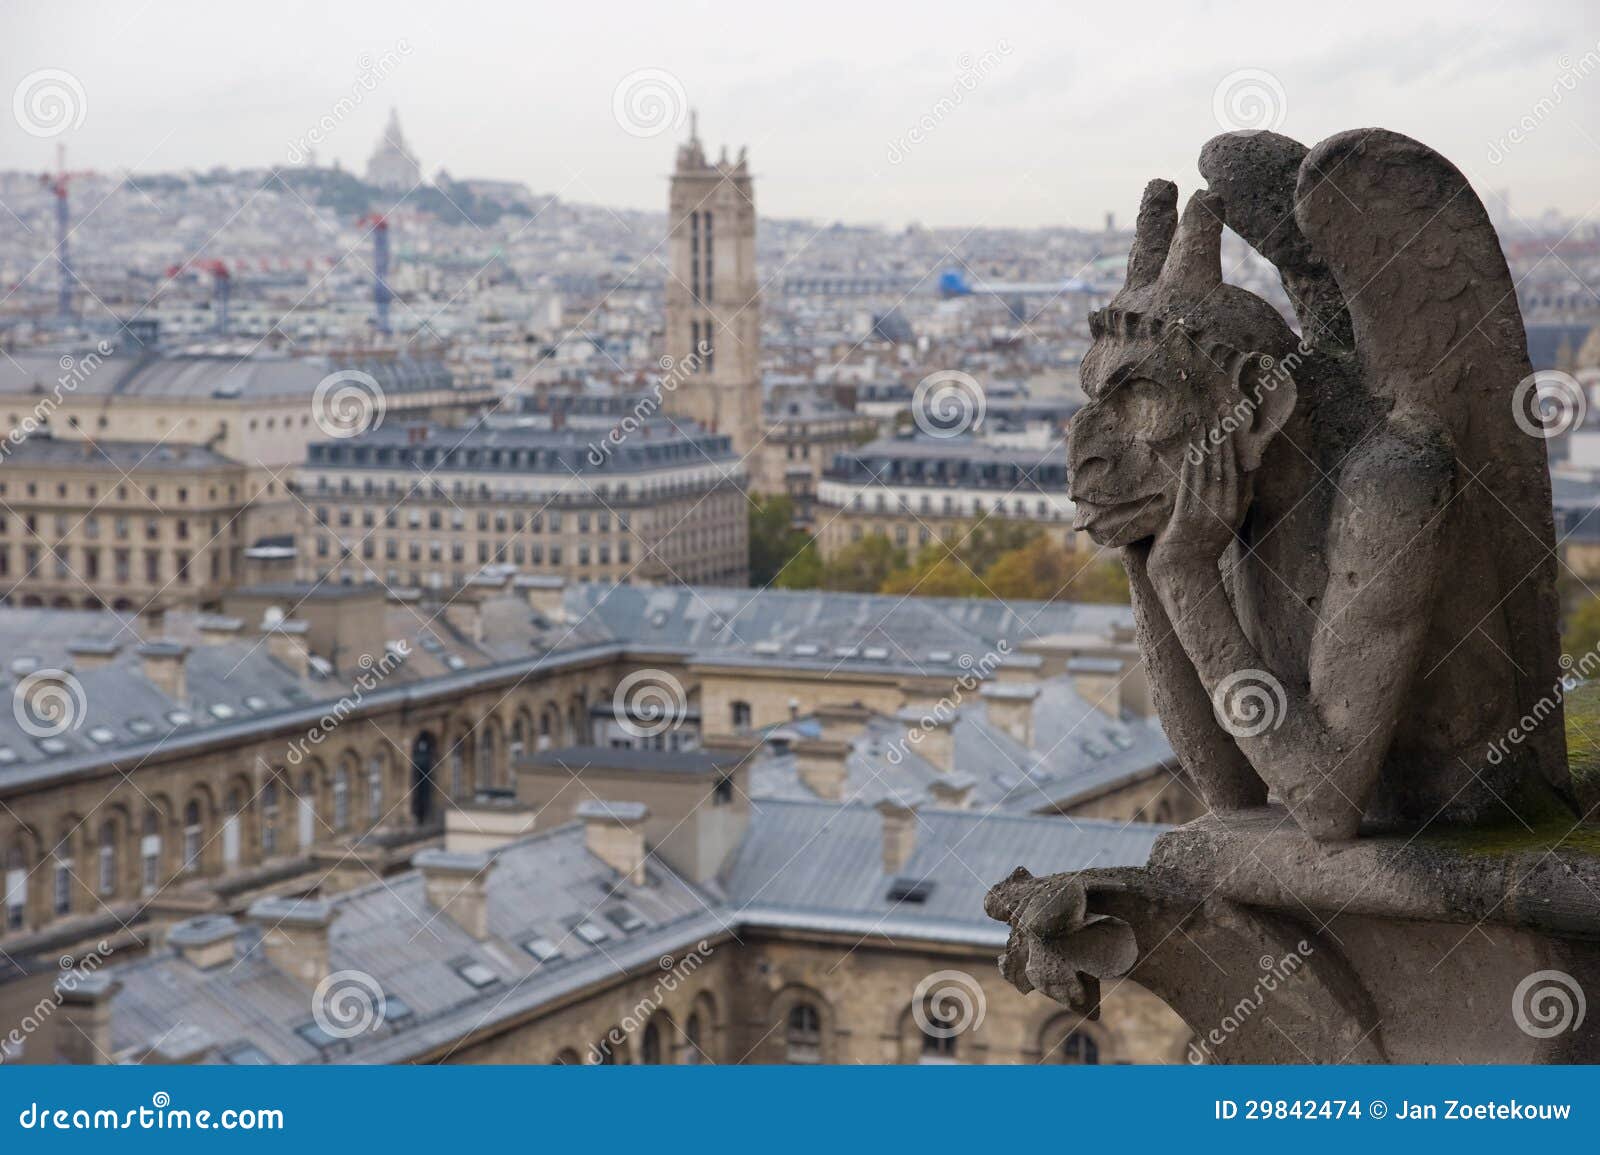 stone gargoyle overlooking paris from the notre dame